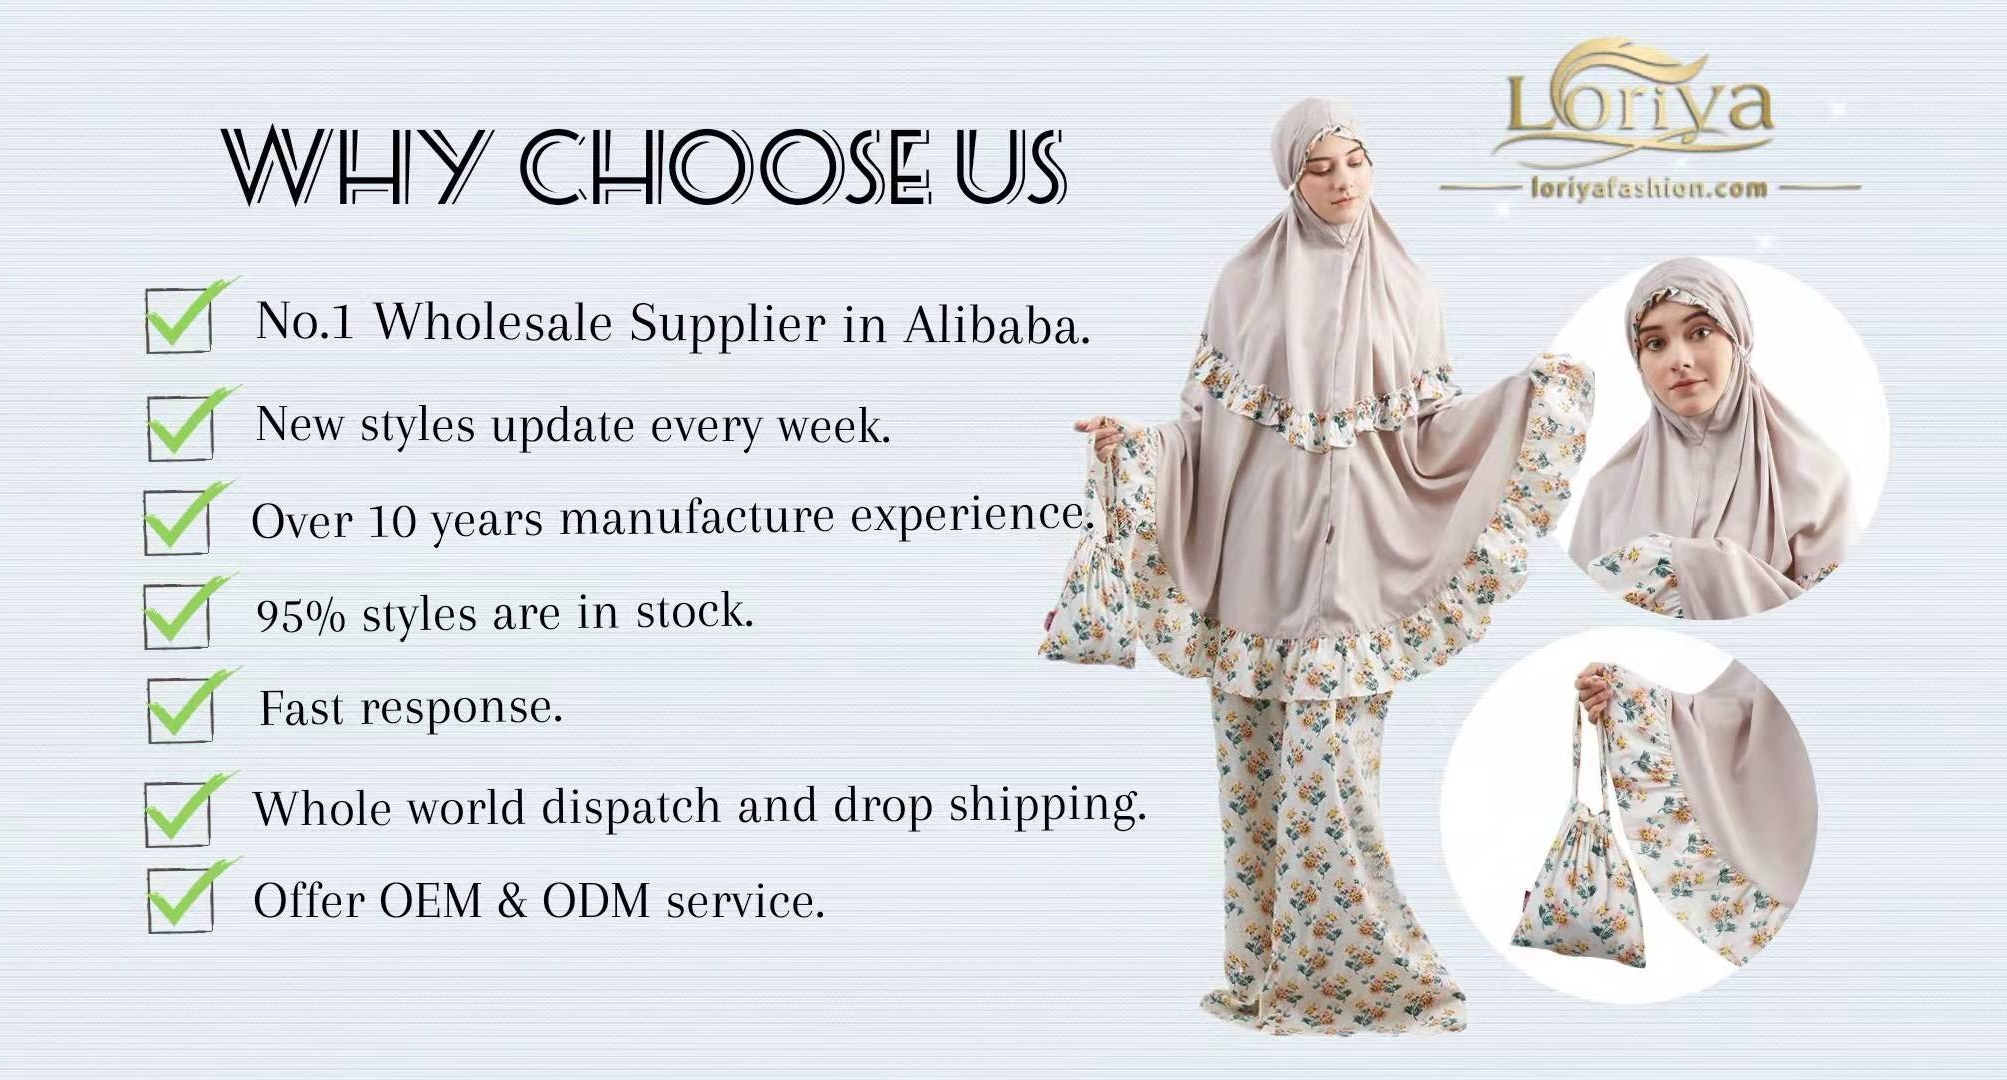 Modest Fashion Islamic Clothing Abaya Sets Women Casual Blouse and Pants Suit with Tie